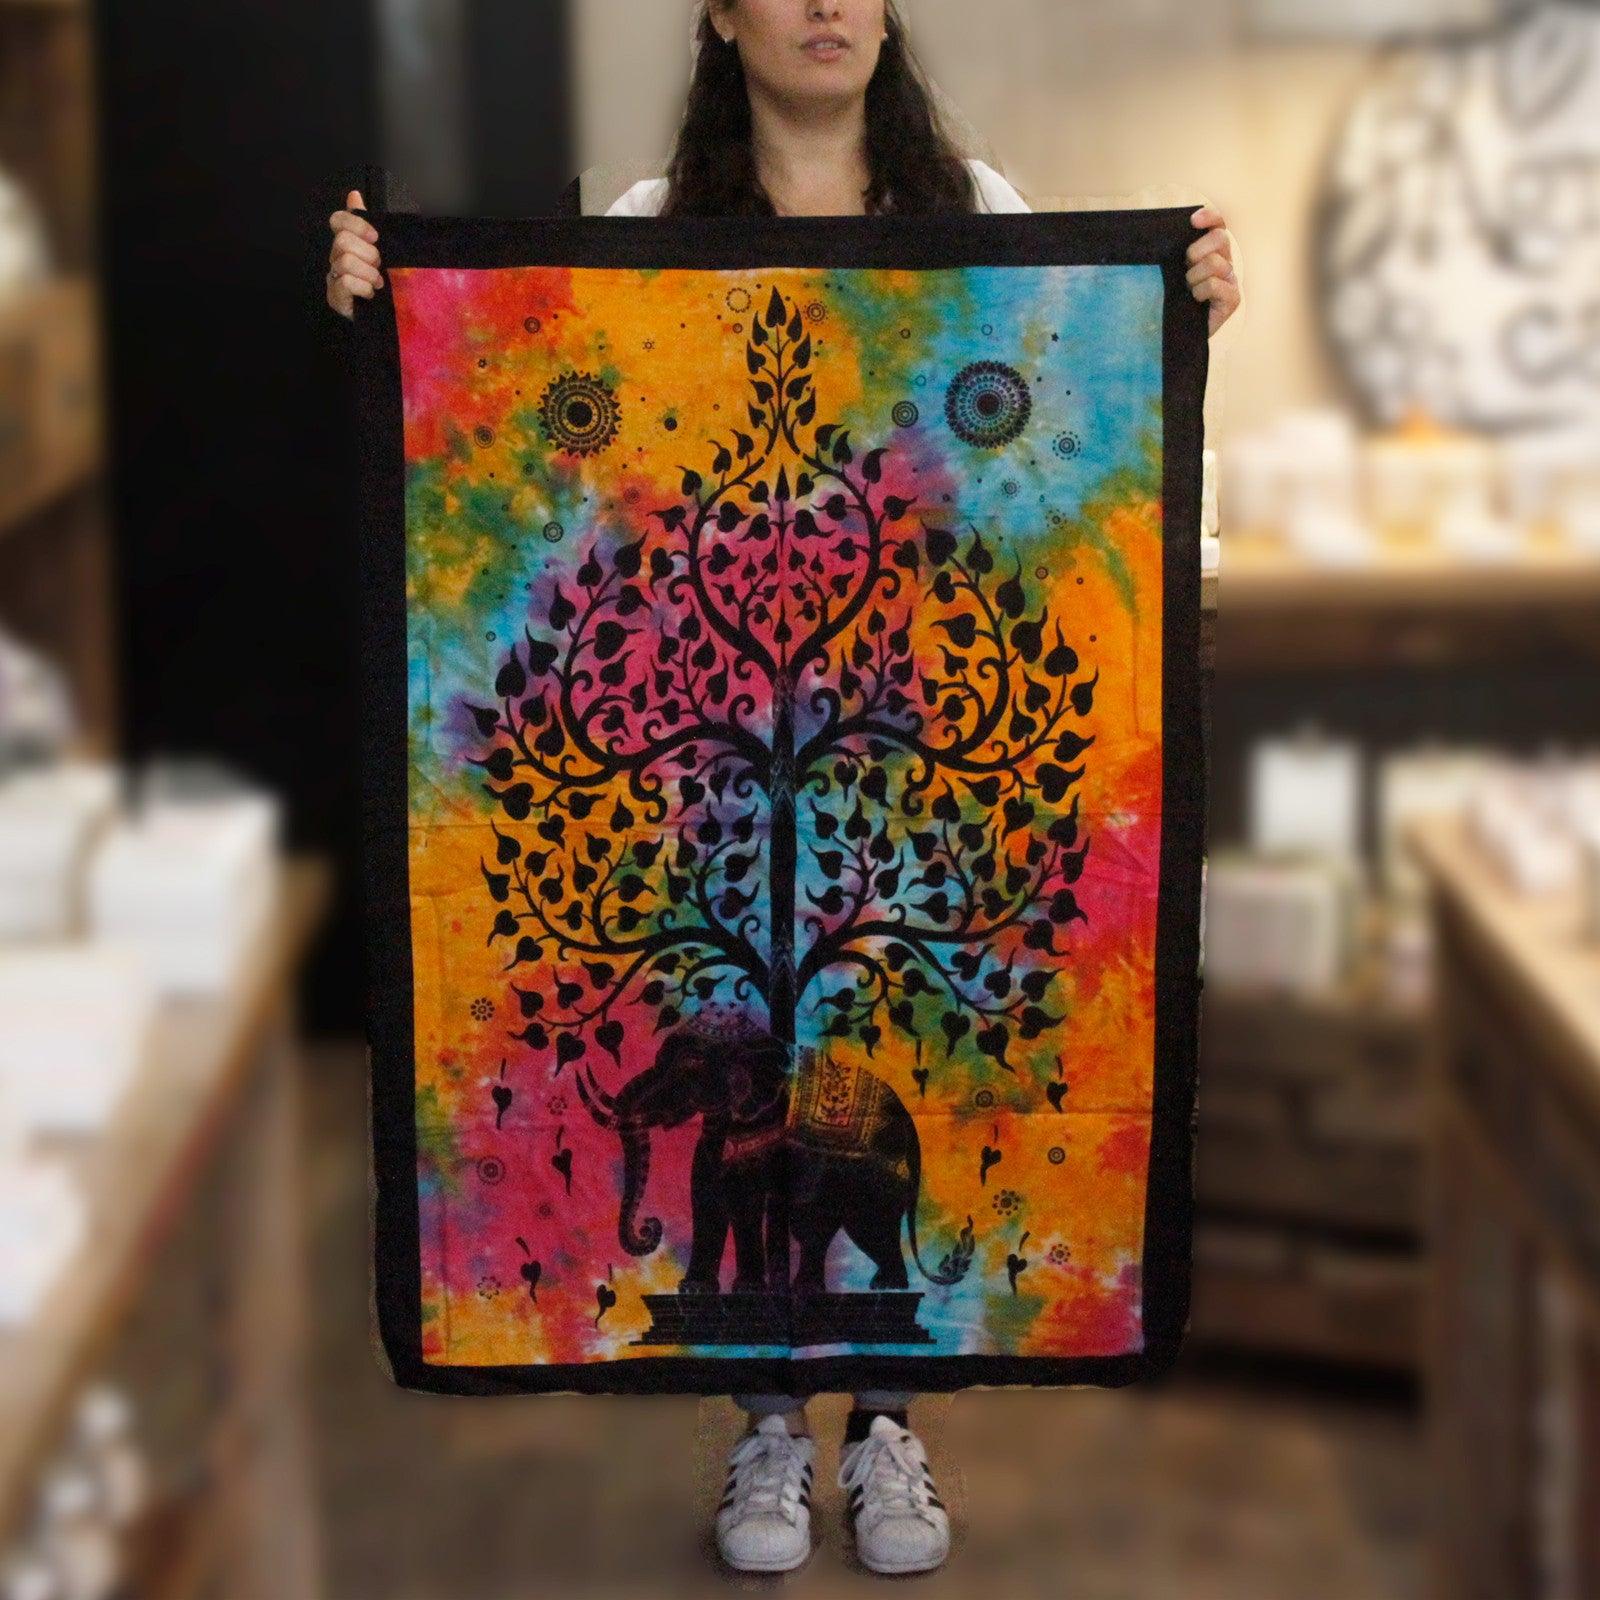 Cotton Wall Art - Elephant Tree - DuvetDay.co.uk